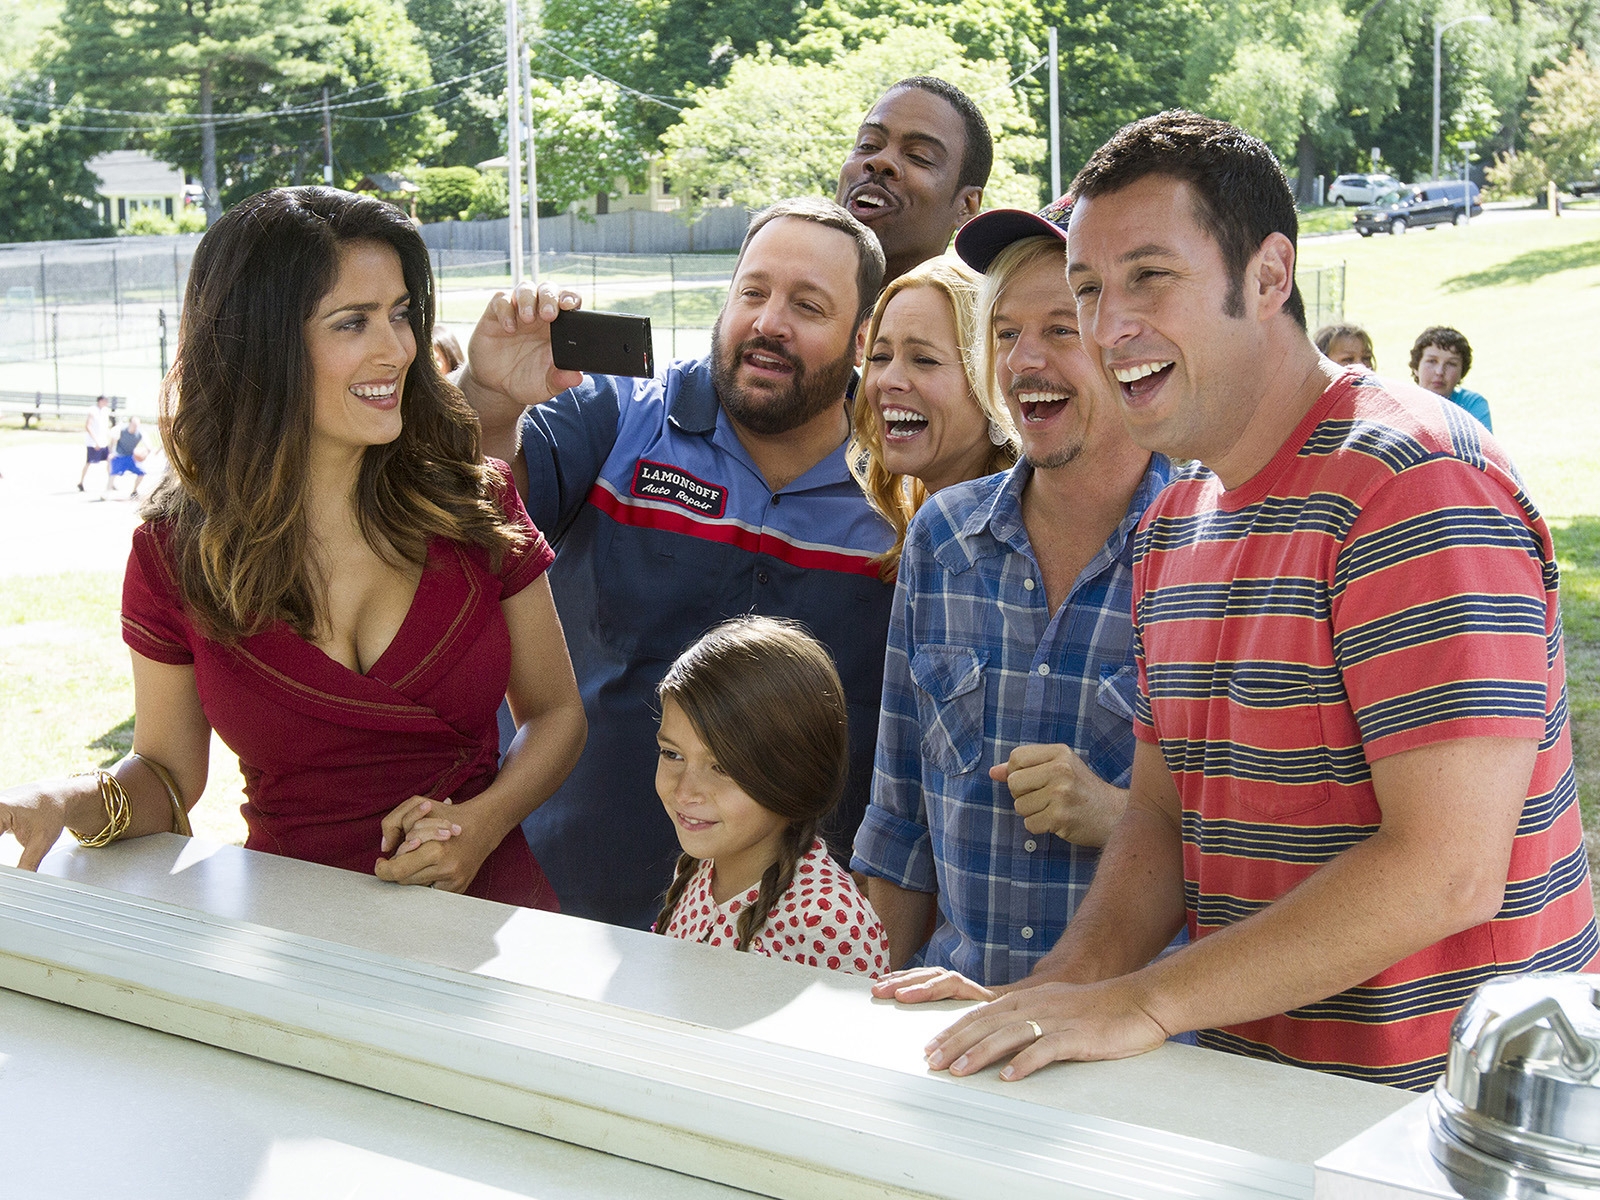 2013 Grown Ups 2 for 1600 x 1200 resolution